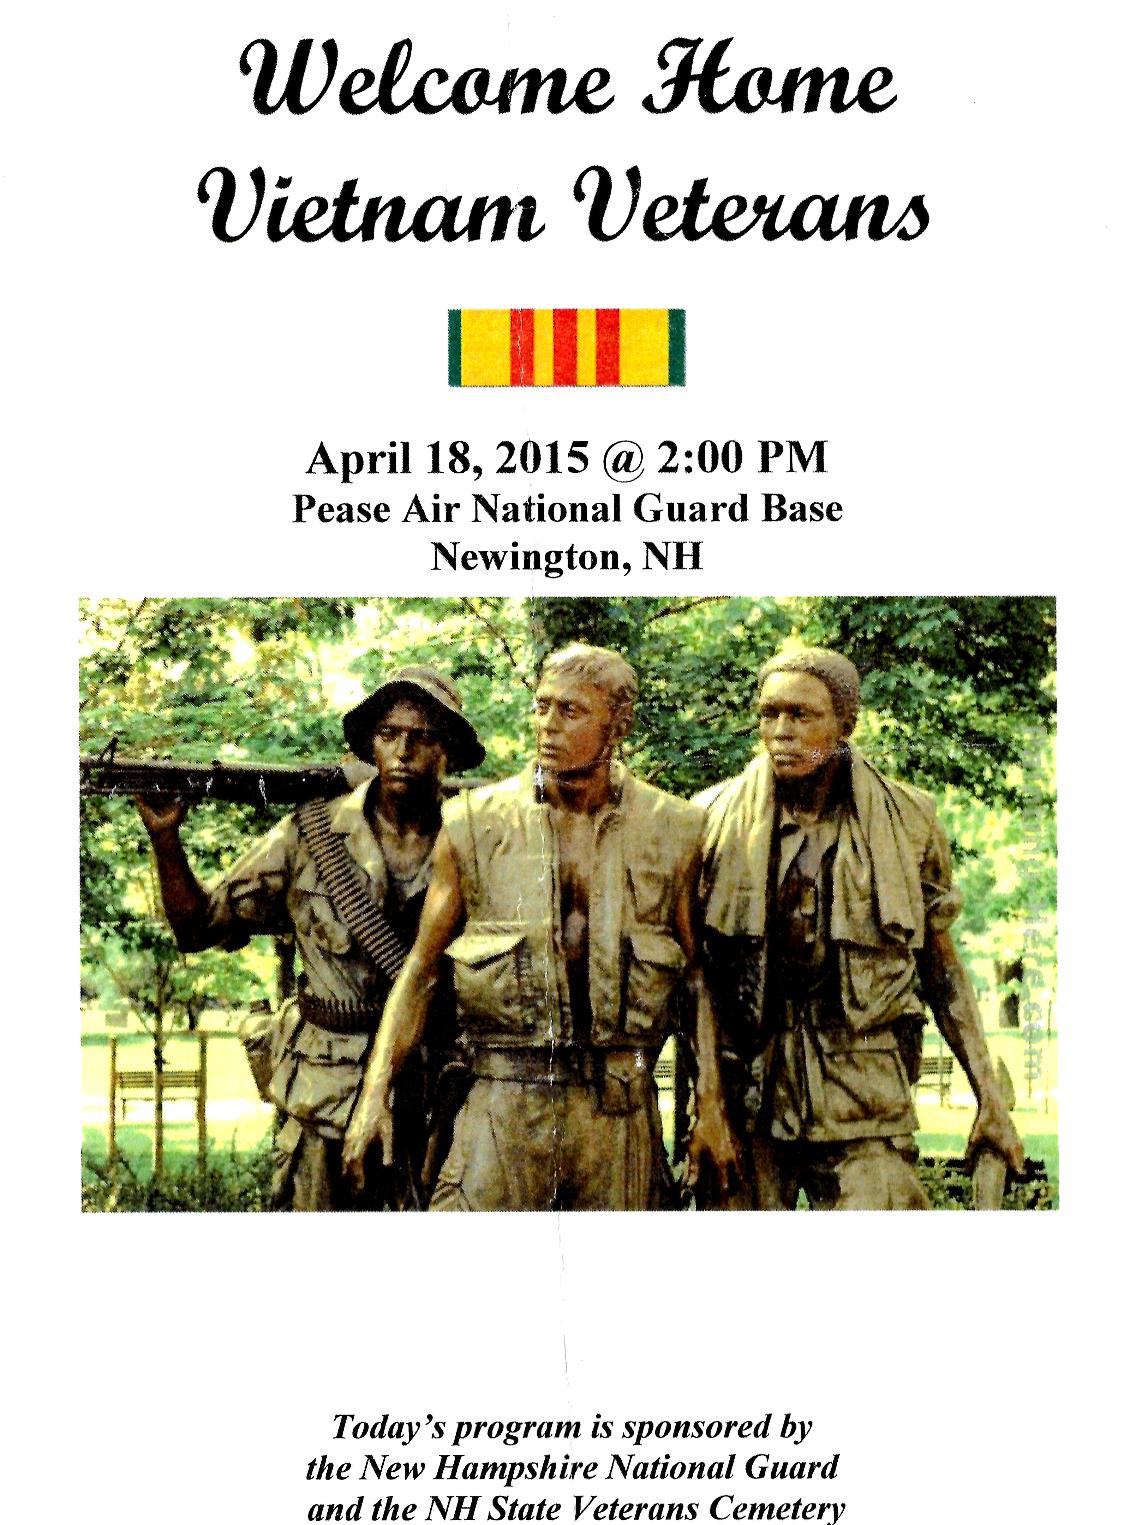 Welcome Home NH Vietnam Veterans Nh State Veterans Cemetery April 18 2015